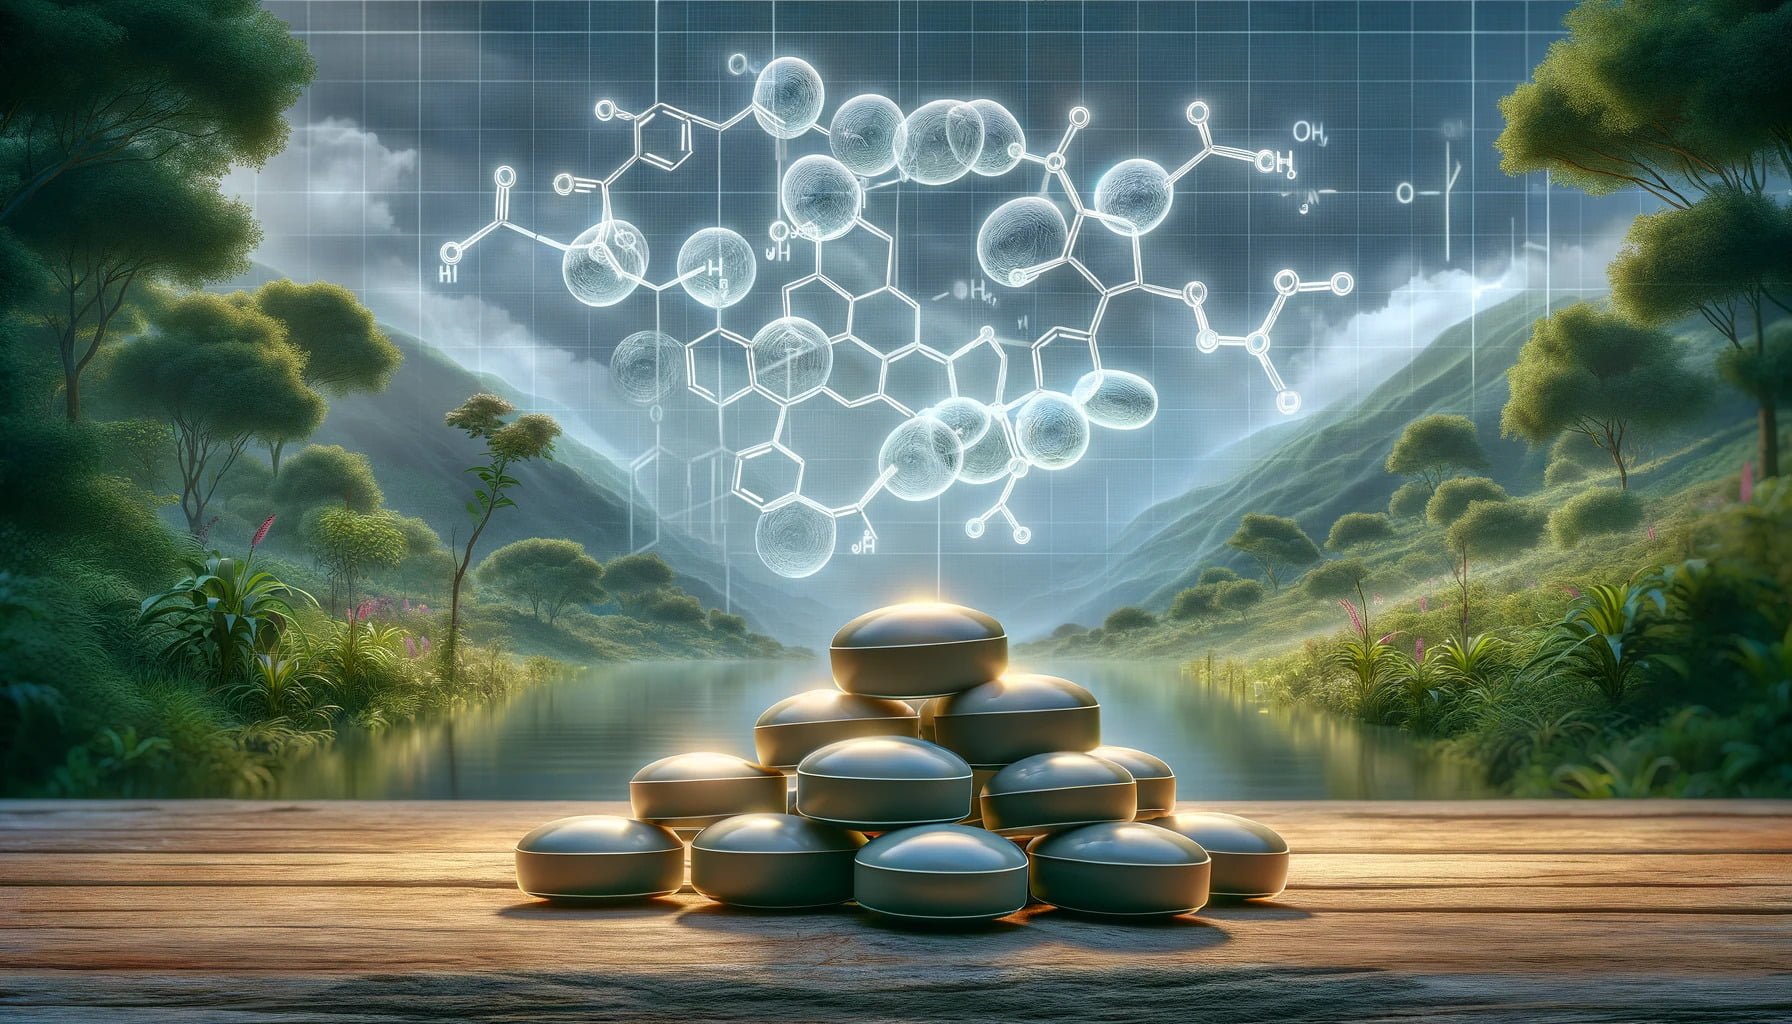  A photorealistic image of Vitamin B1 tablets, prominently displayed in a natural setting.